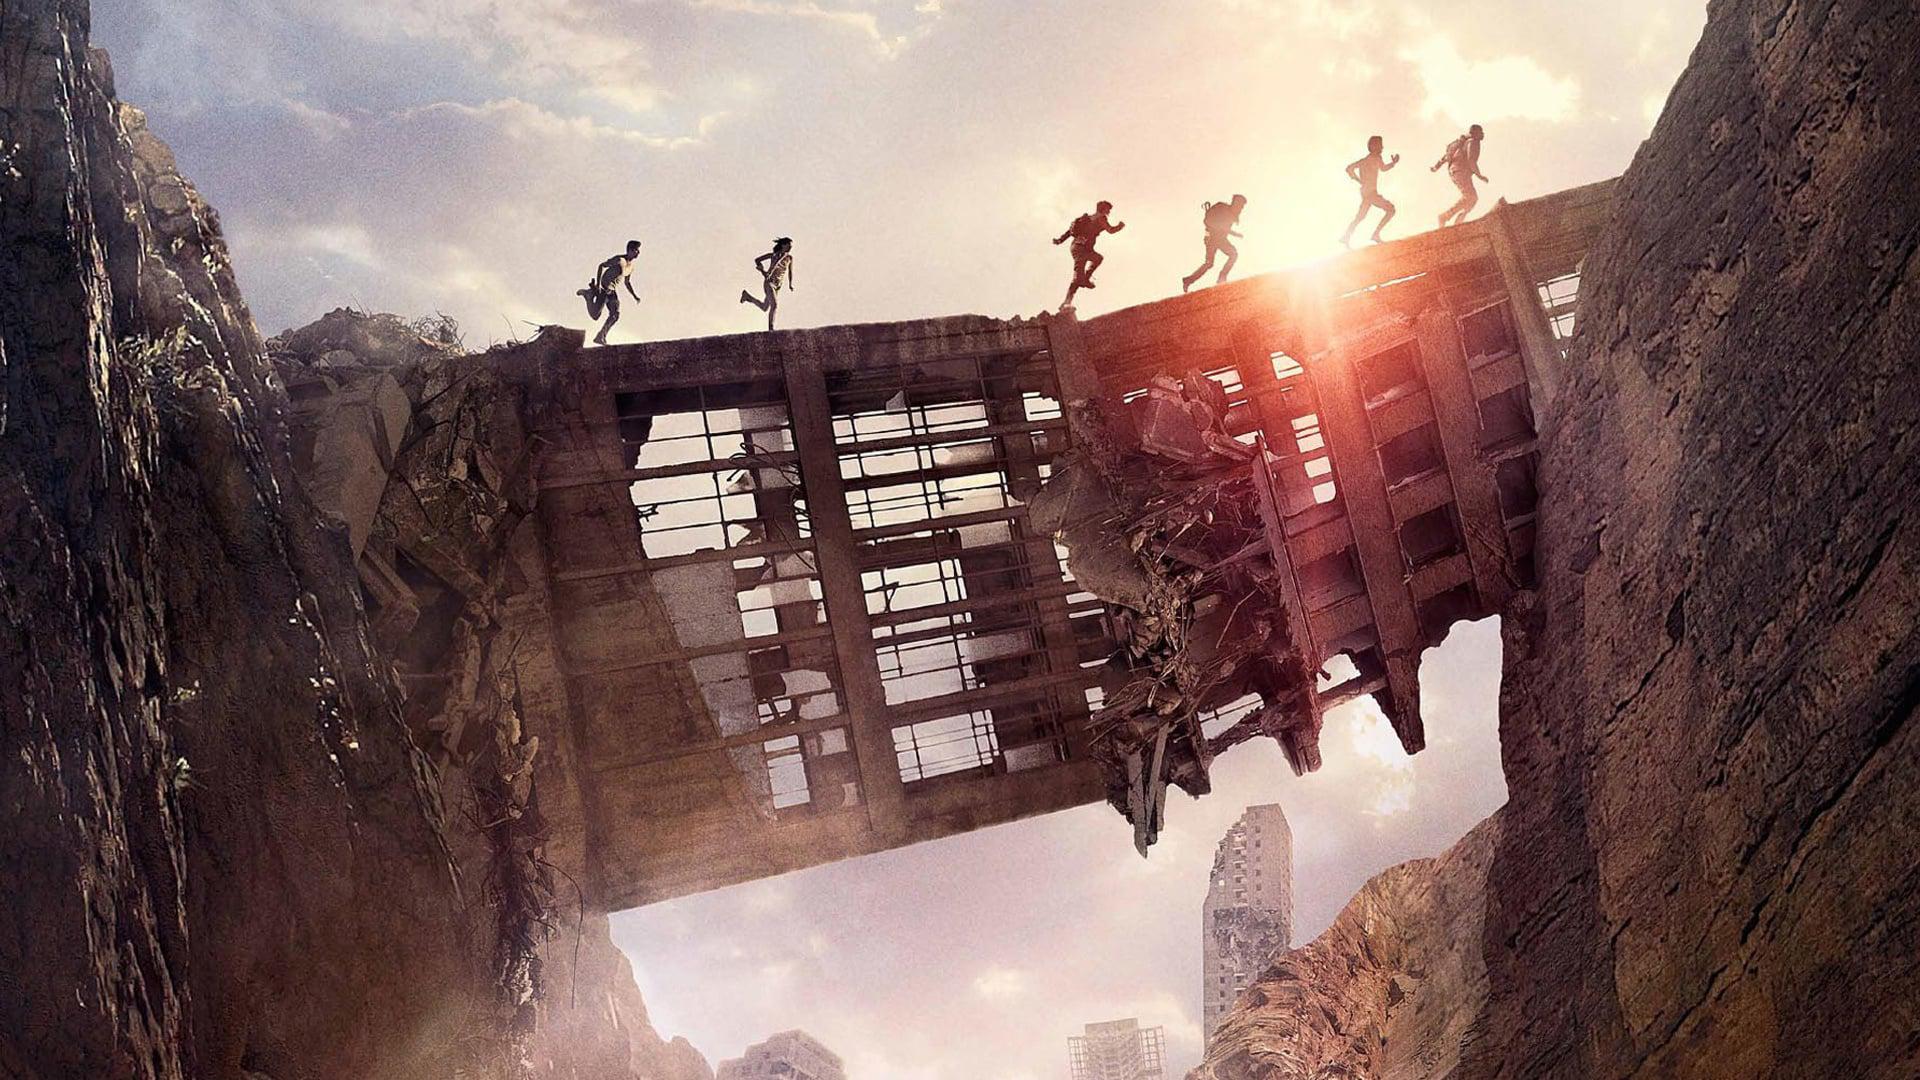 Backdrop Image for Maze runner: the Scorch trials